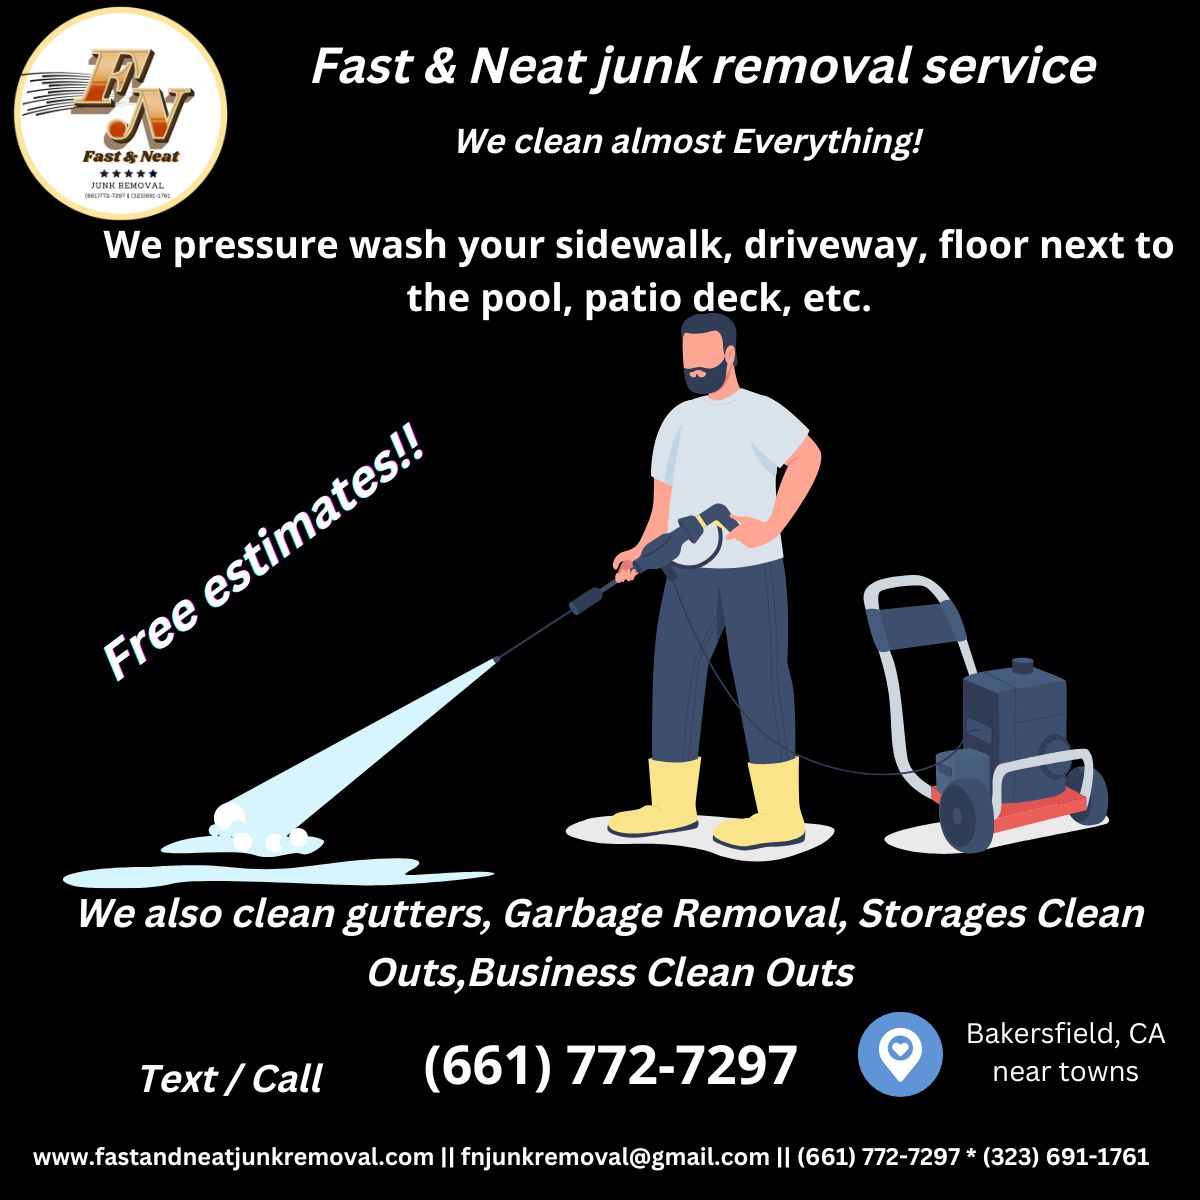 We pressure wash your driveway and more Fast and Neat junk removal